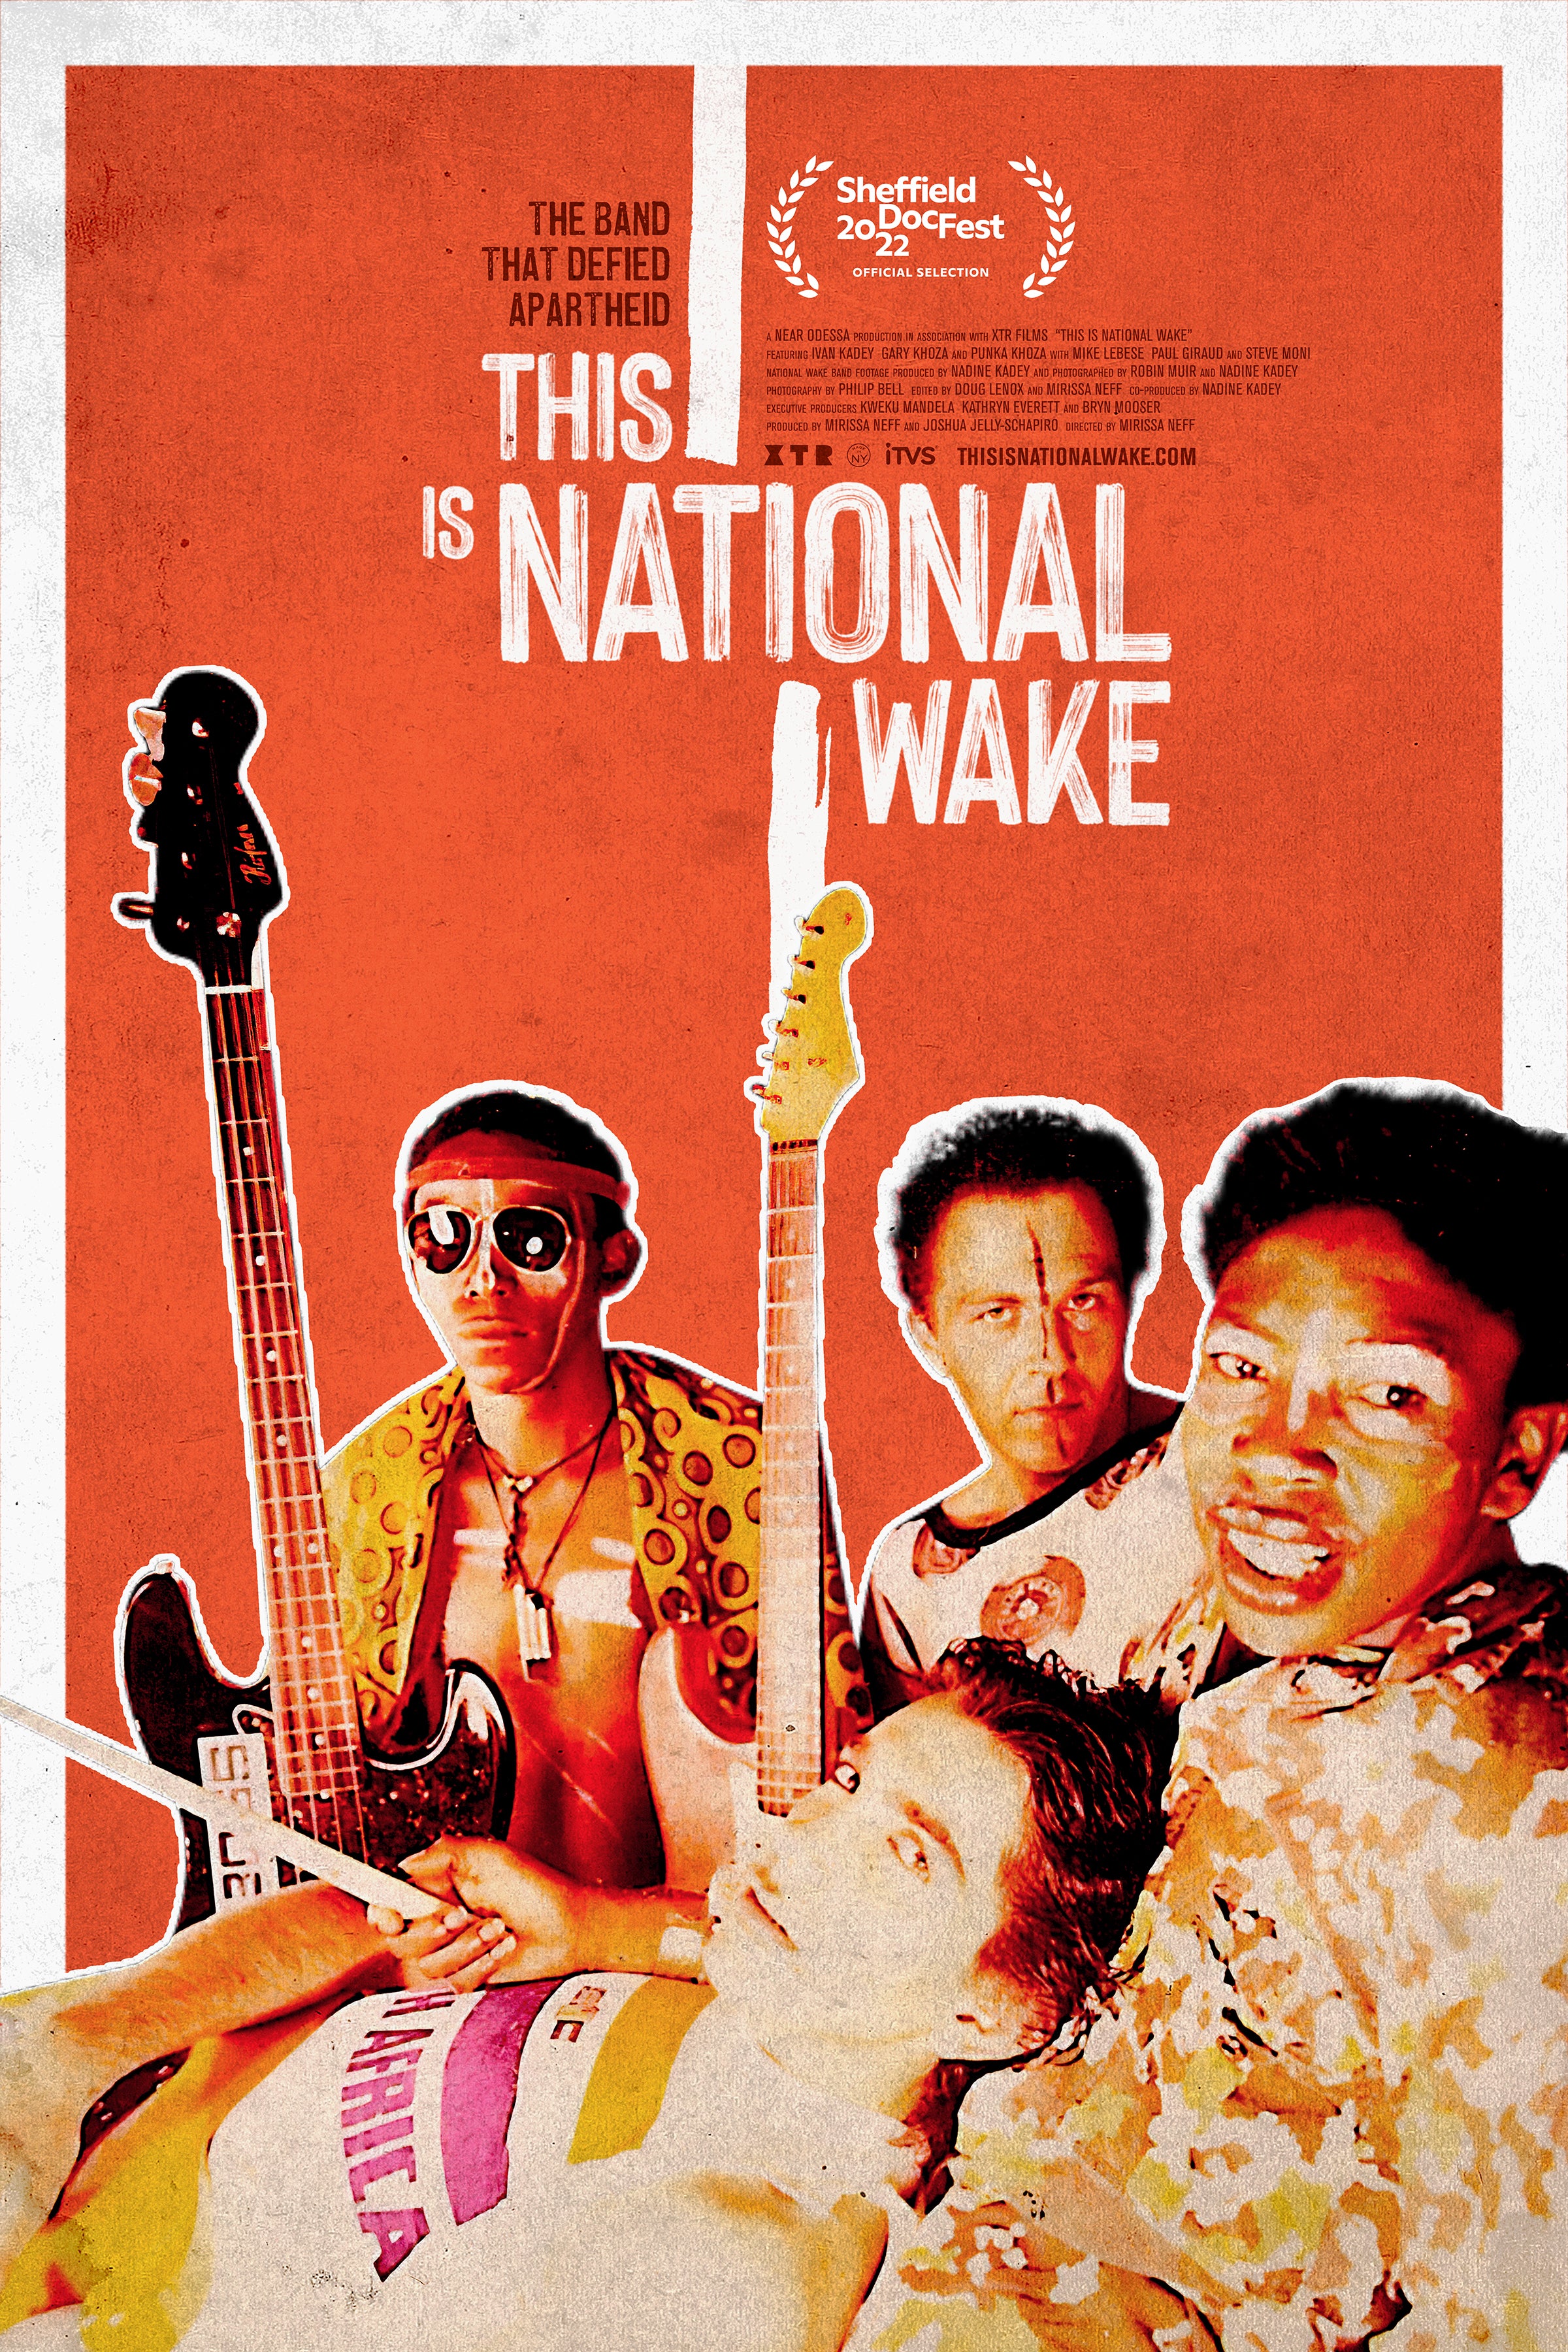 ‘This Is National Wake’ director Mirissa Neff: ‘These were people who were not even supposed to be together, yet they formed for the love of music across race lines when it was illegal to do so'